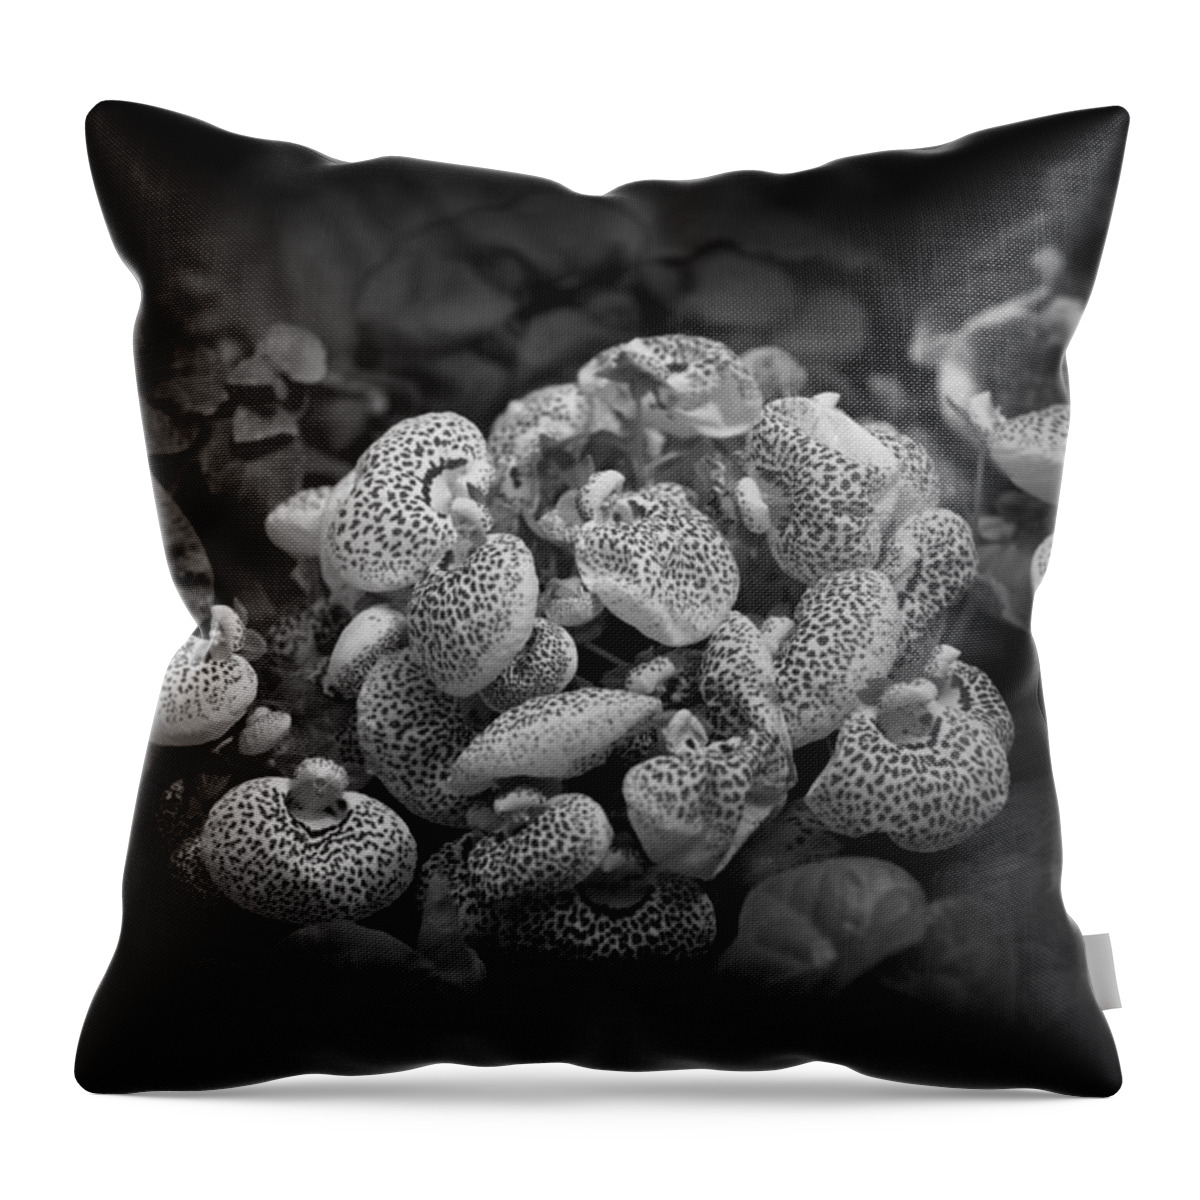 Black & White Throw Pillow featuring the photograph Orchids In Gray by Ray Congrove